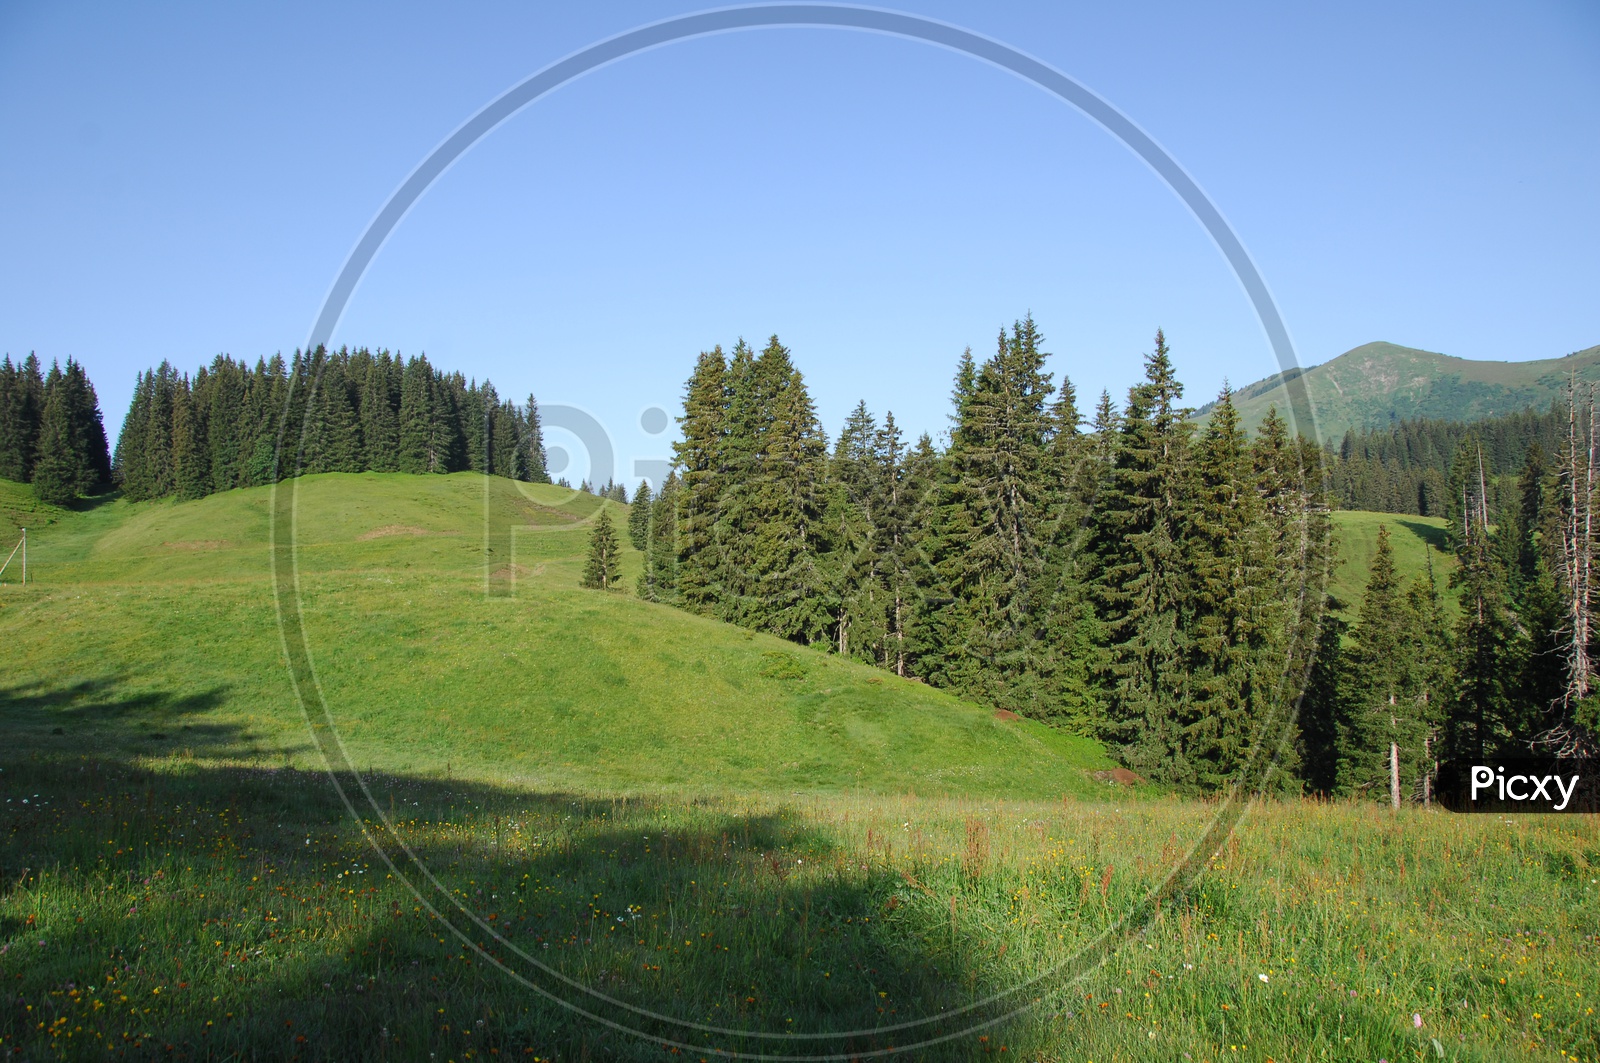 View of Swiss Alps alongside the green meadow and spruce trees